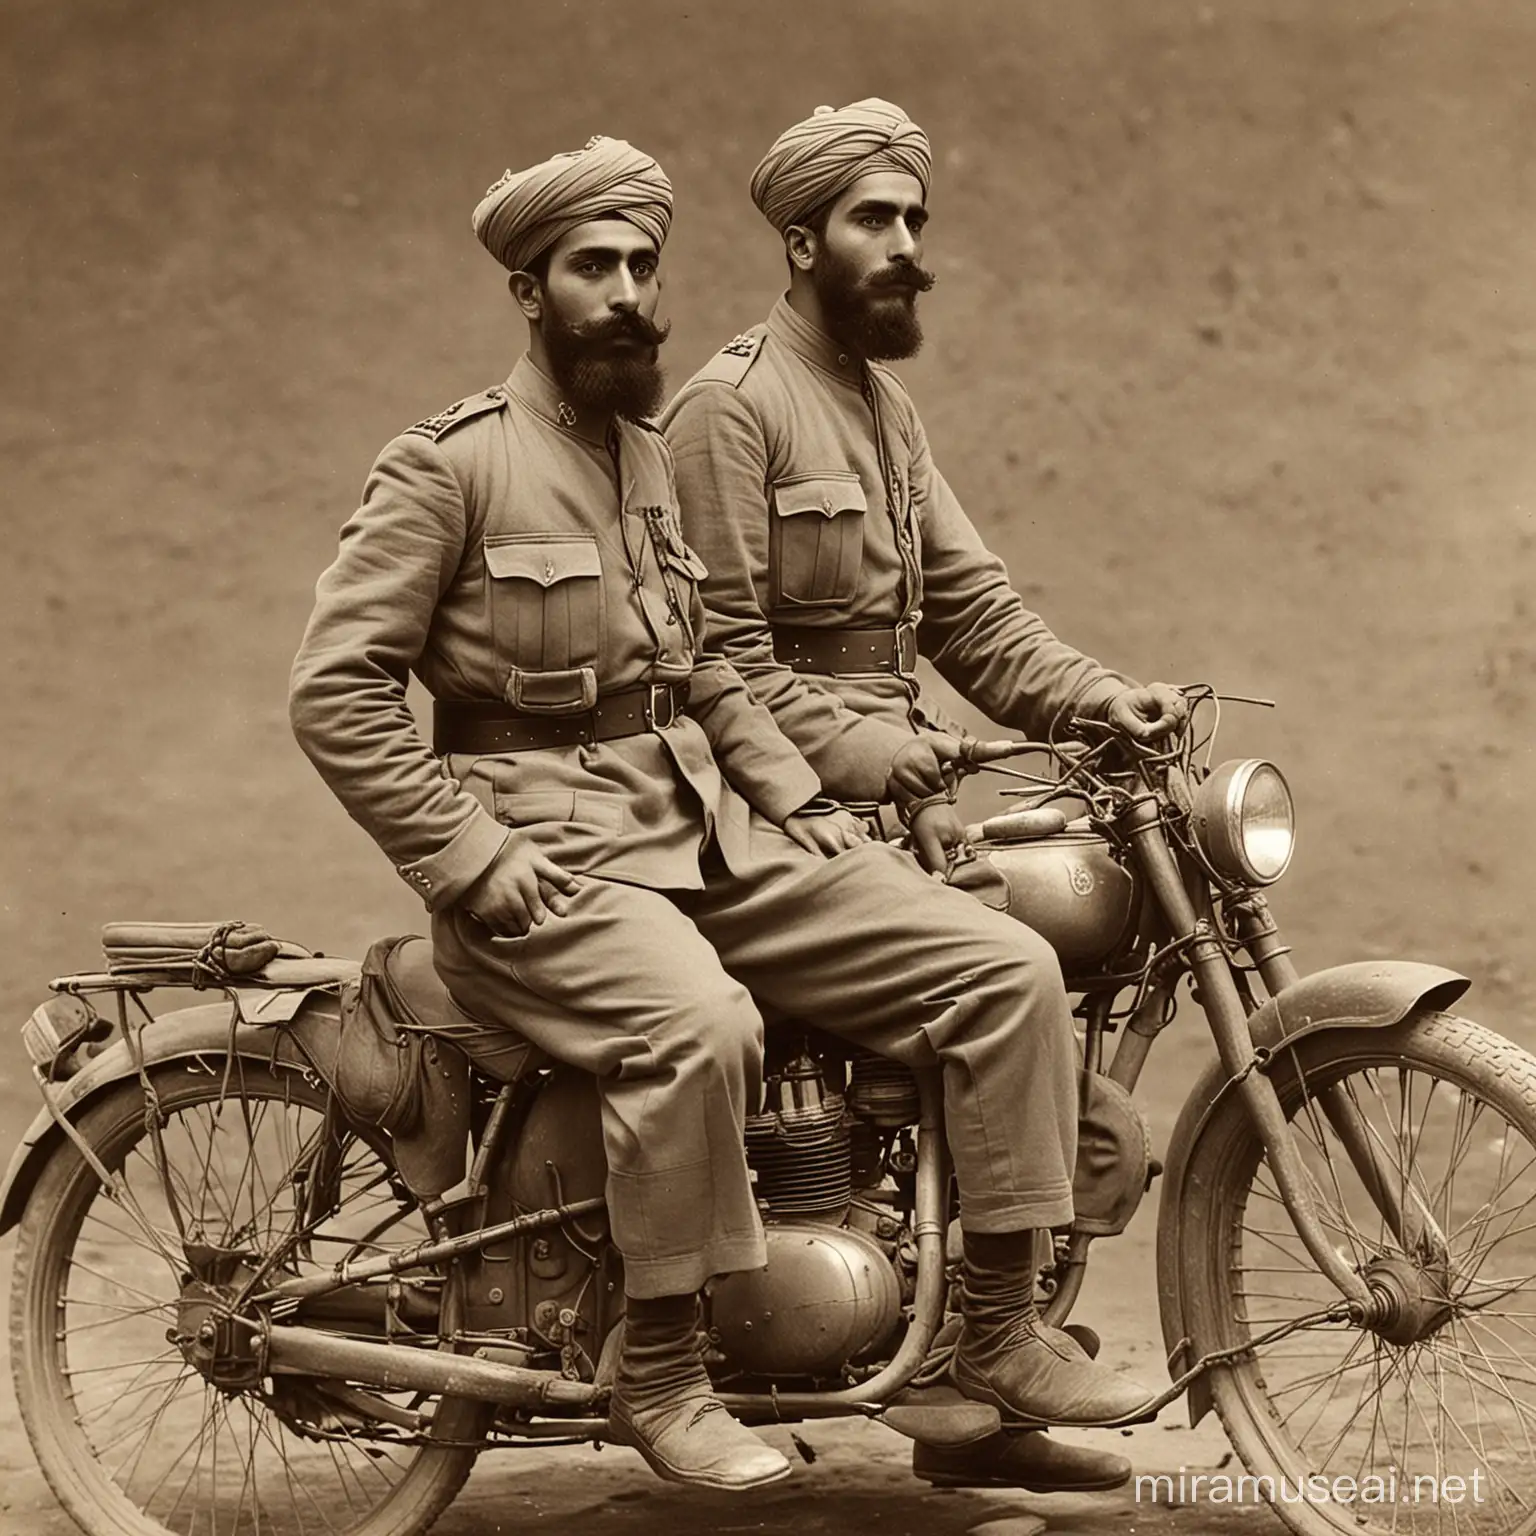 Qajar Soldiers Riding Motorbikes in Traditional Garb